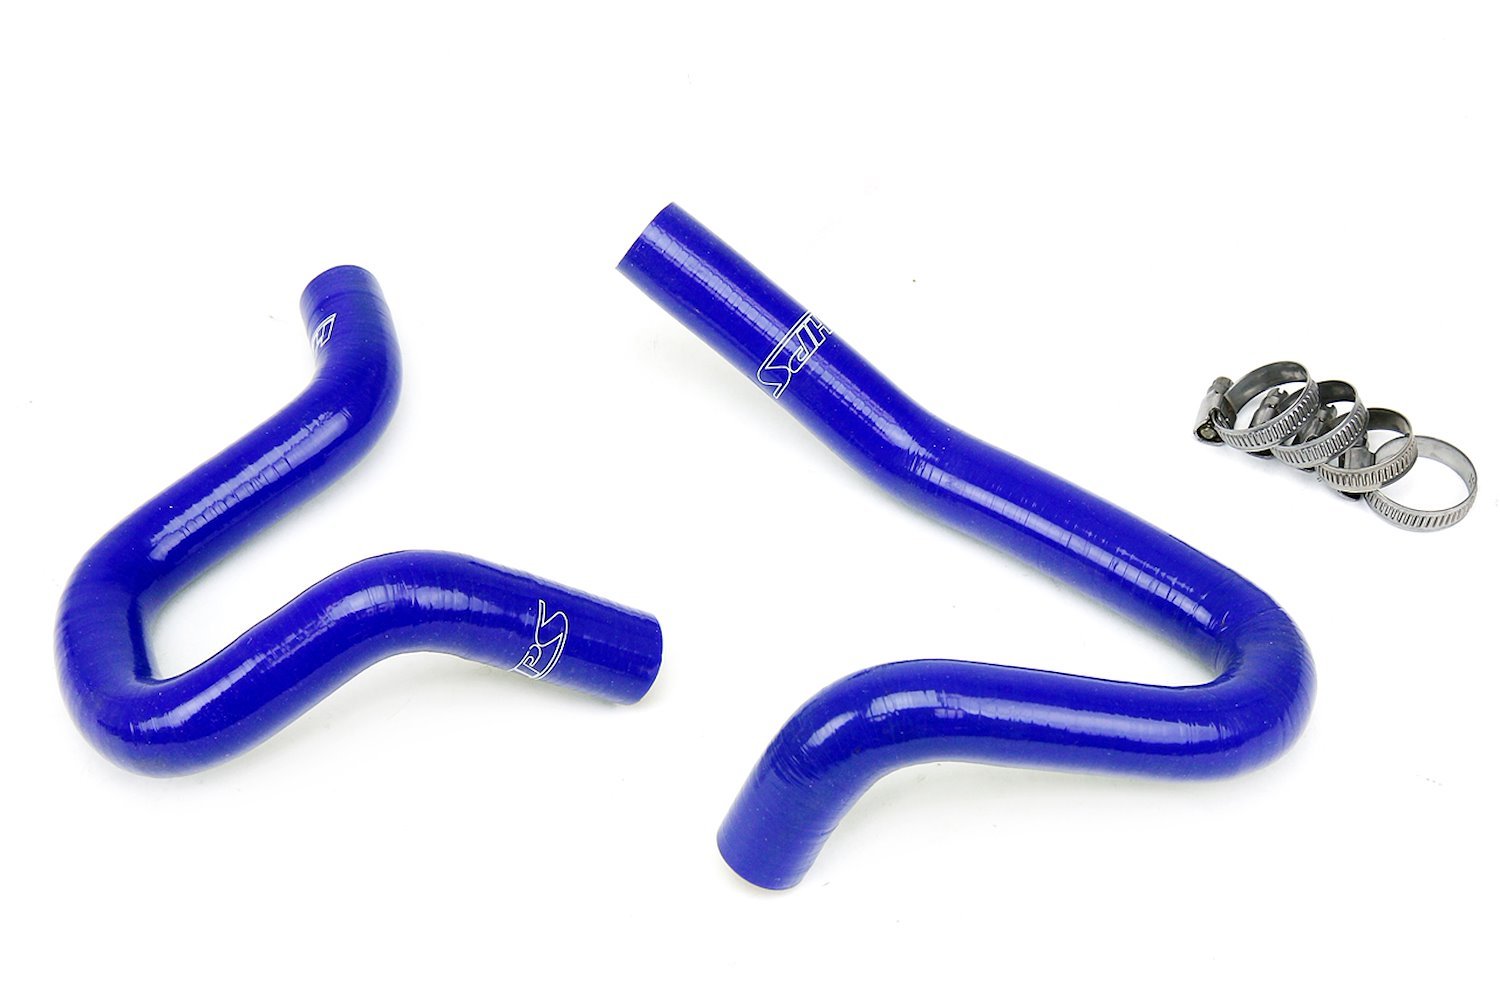 57-1324H-BLUE Heater Hose Kit, High-Temp 3-Ply Reinforced Silicone, Replace OEM Rubber Heater Coolant Hoses